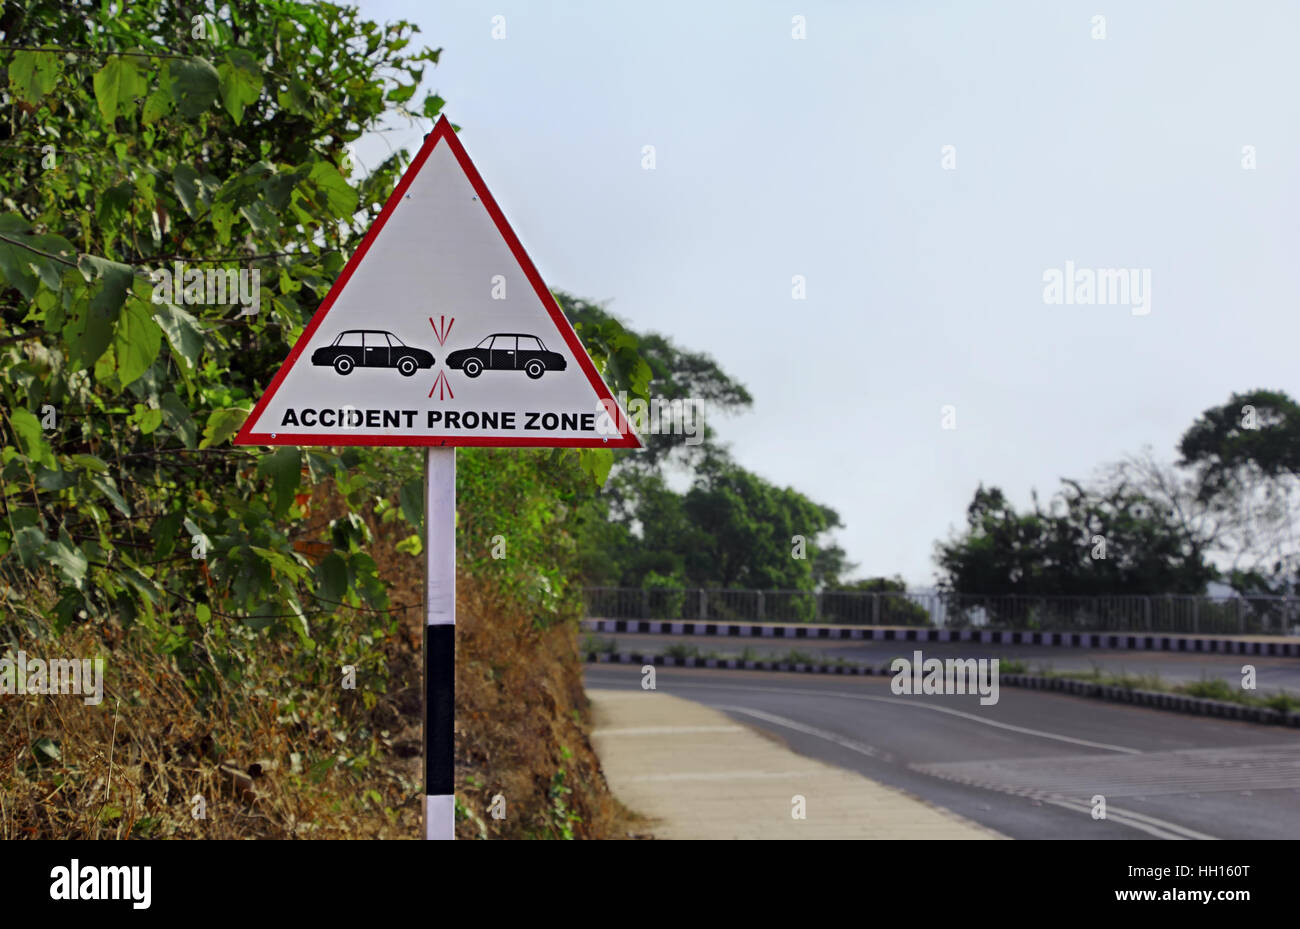 Road sign warning motorists to be careful at a zone prone to possible accidents and collisions in a hill highway Stock Photo